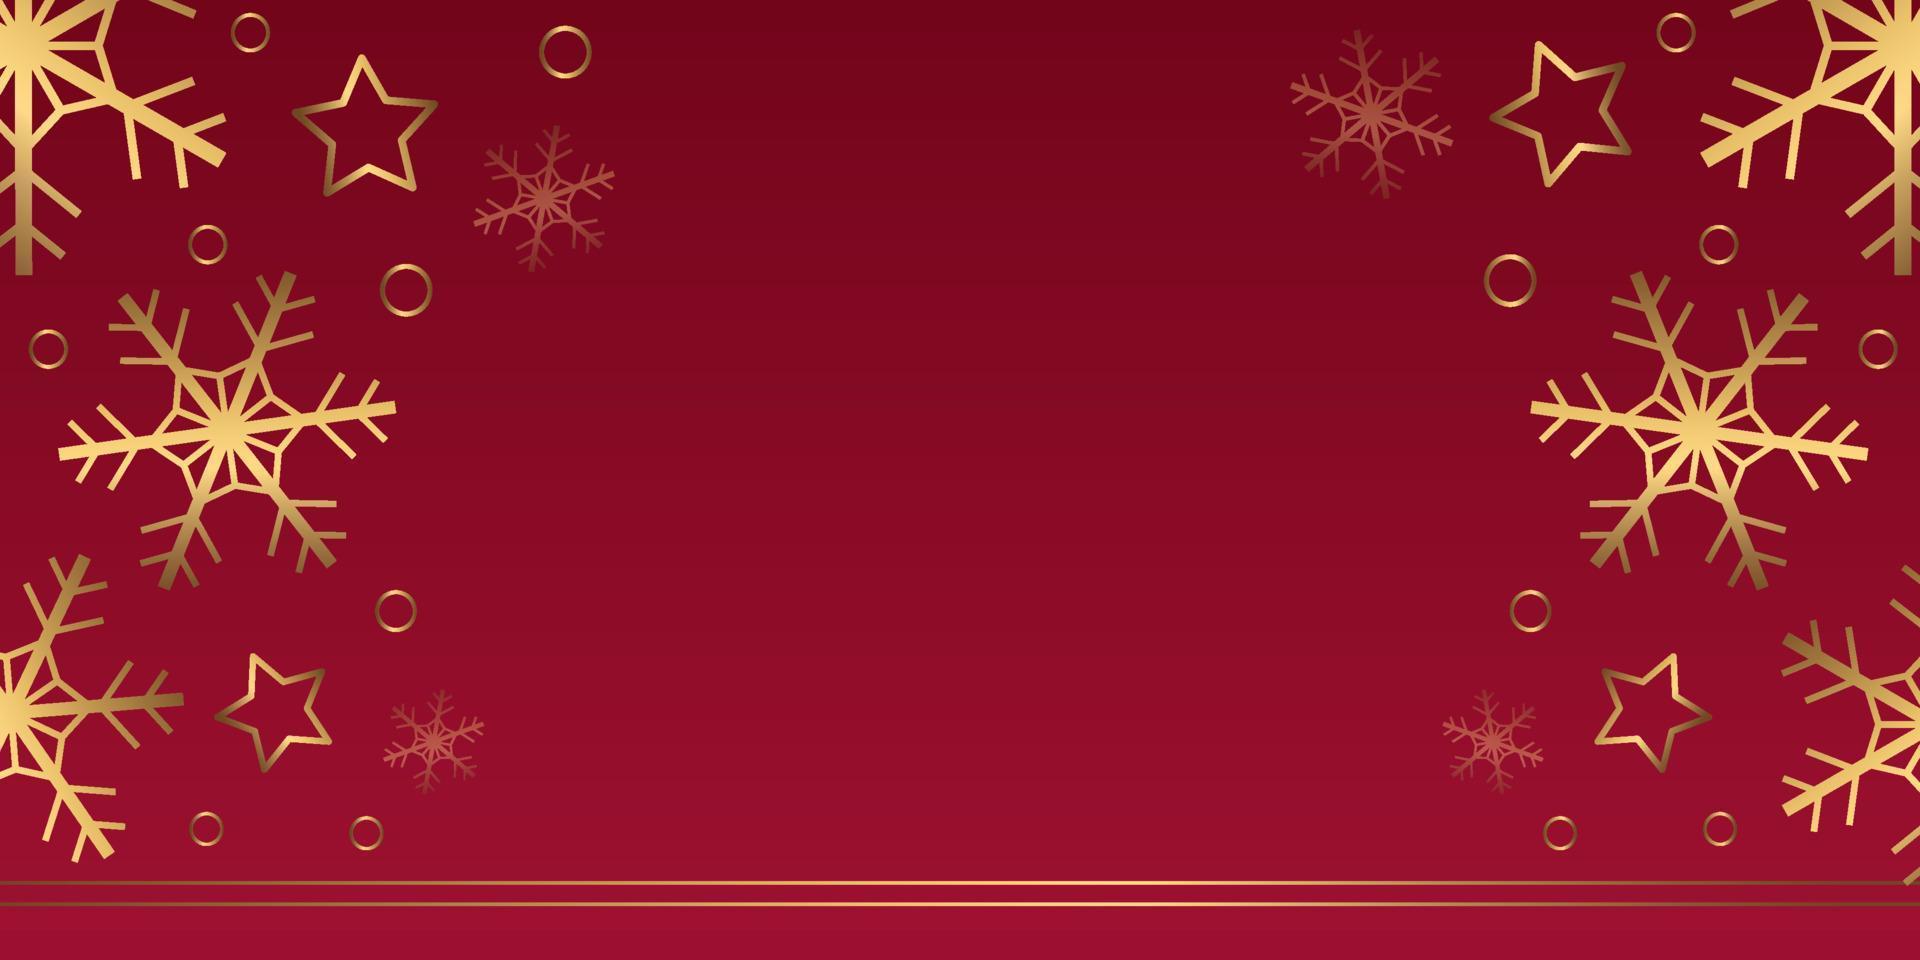 Vector winter banner with gold snowflakes, stars, rings on red background. Horizontal backdrop with copyspace.